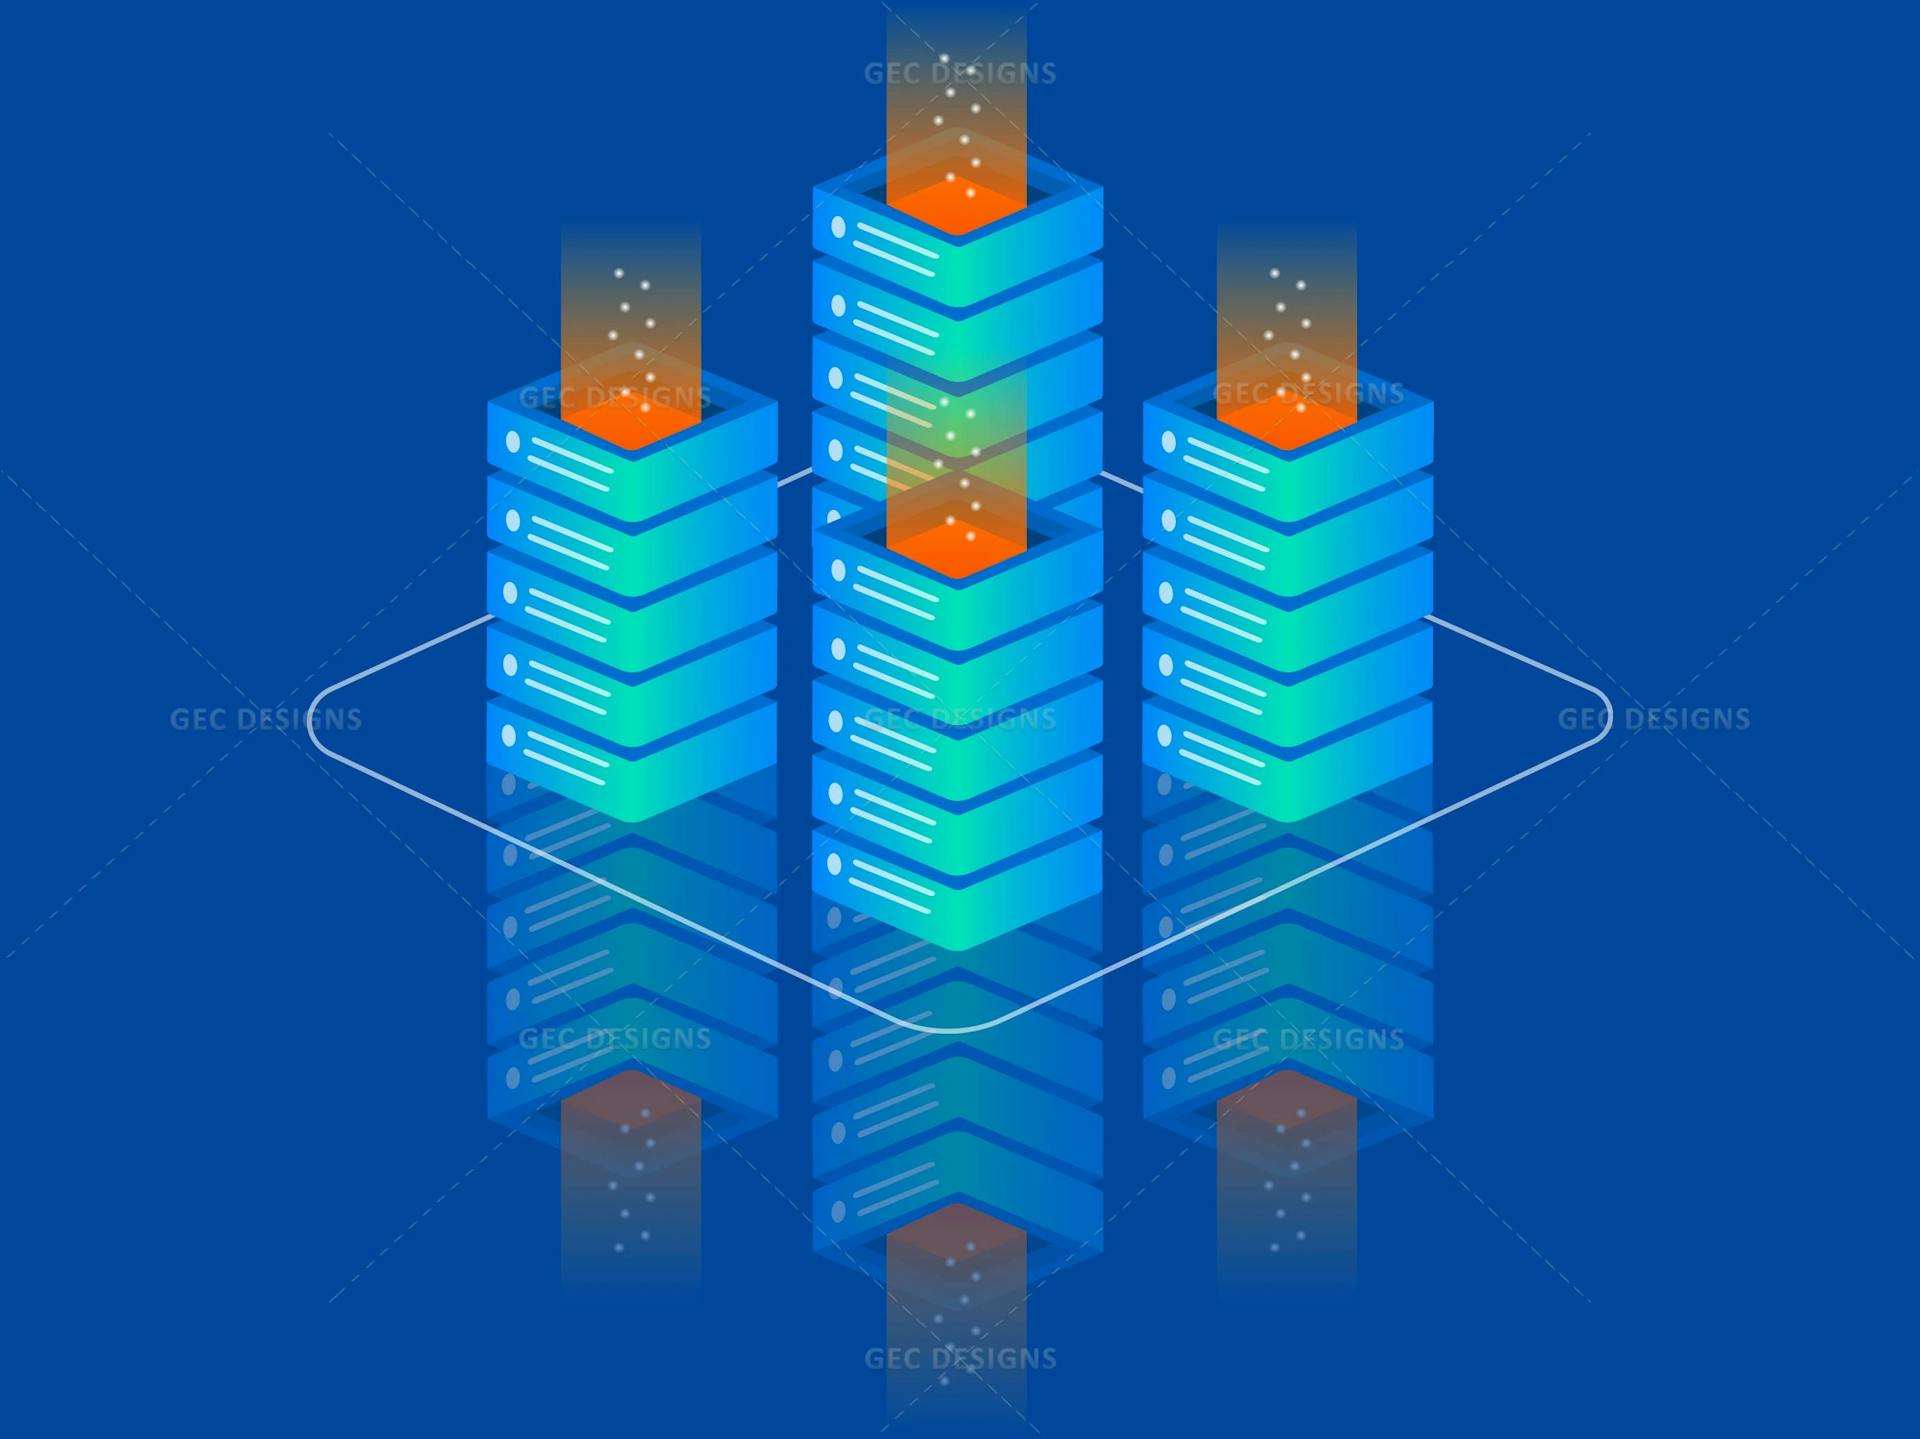 Vector Art of a Server Room and Big Data Processing Center